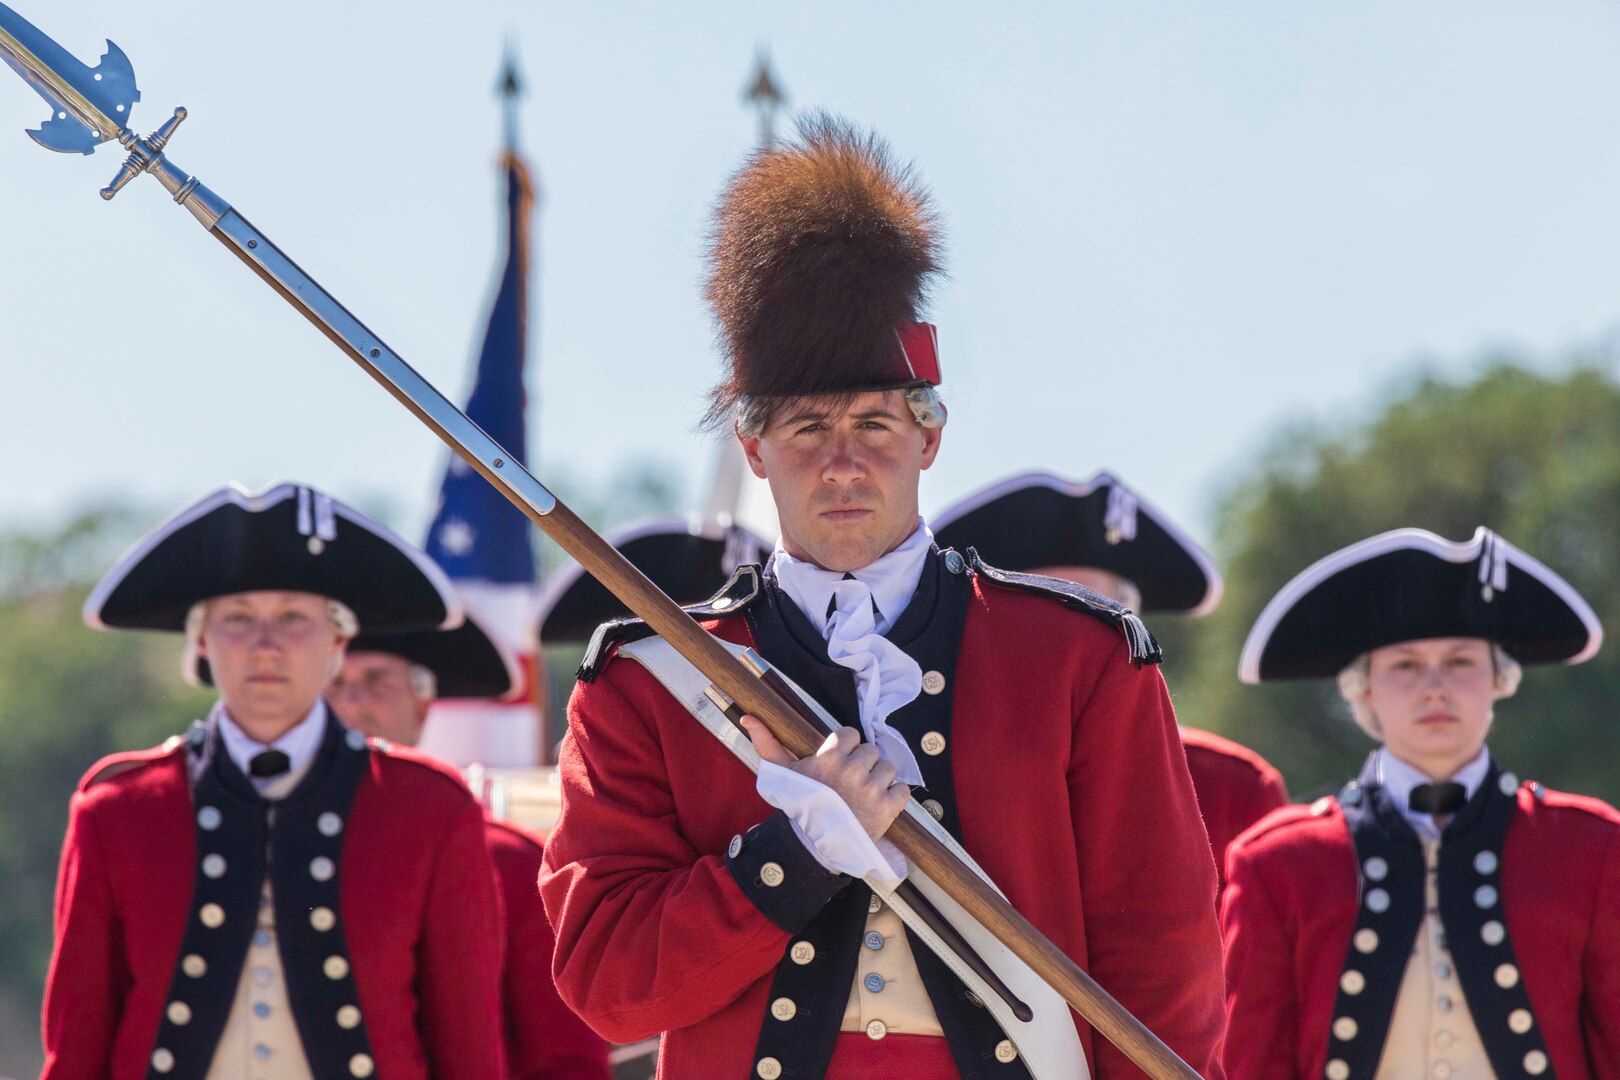 U.S. Army Old Guard Fife and Drum Corps perform during the annual Military Appreciation Weekend May 6, 2017 at Joint Base San Antonio-Fort Sam Houston, Texas. U.S. U.S. Army North and JBSA hosted the two-day event, which featured music, family activities, and various military demonstrations. This year, the appreciation weekend also commemorated the 300th anniversary for the city of San Antonio. (U.S. Air Force photo by Ismael Ortega / Released)